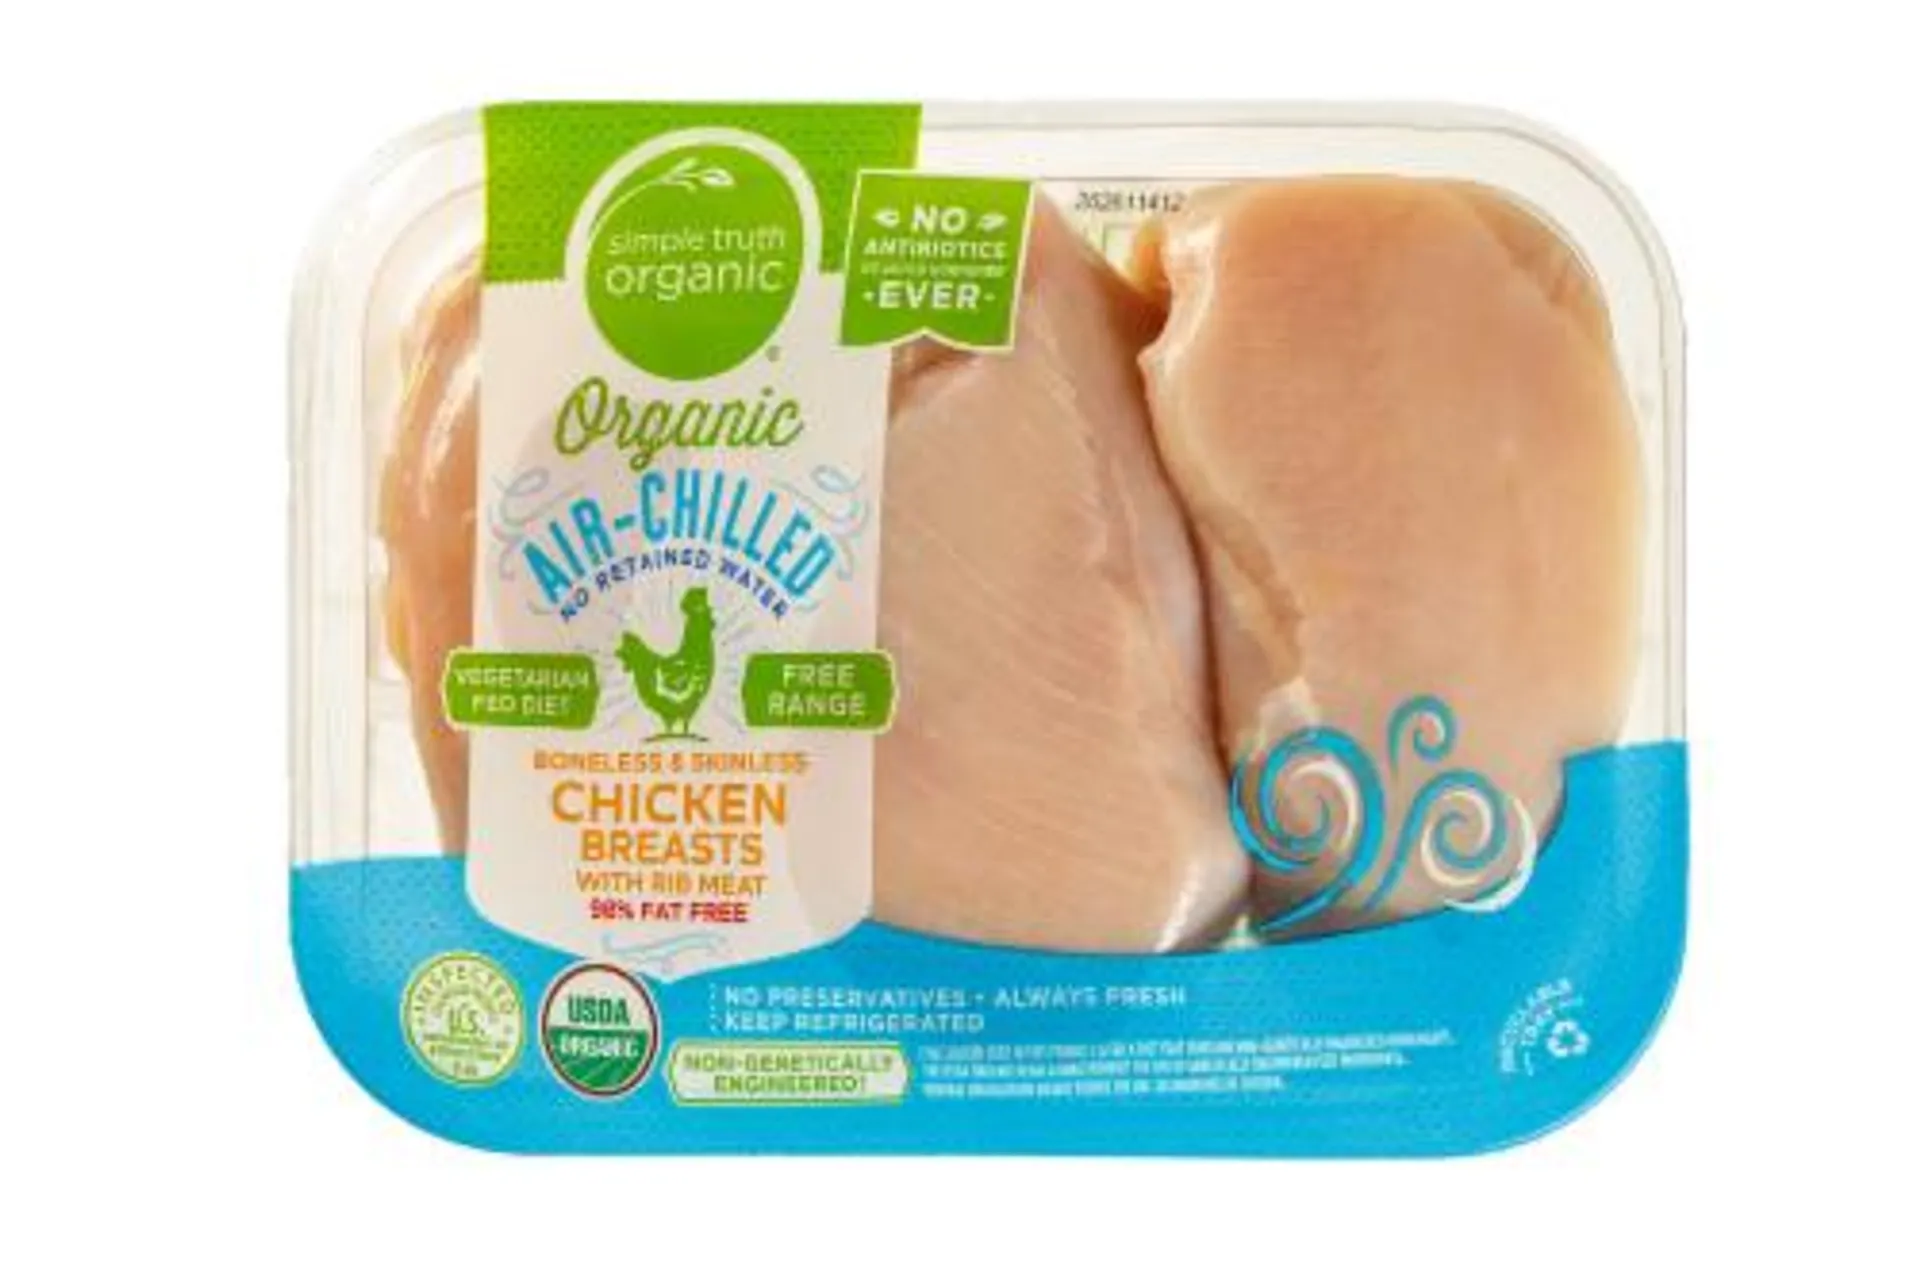 Simple Truth Organic® Air-Chilled Boneless Skinless Chicken Breasts